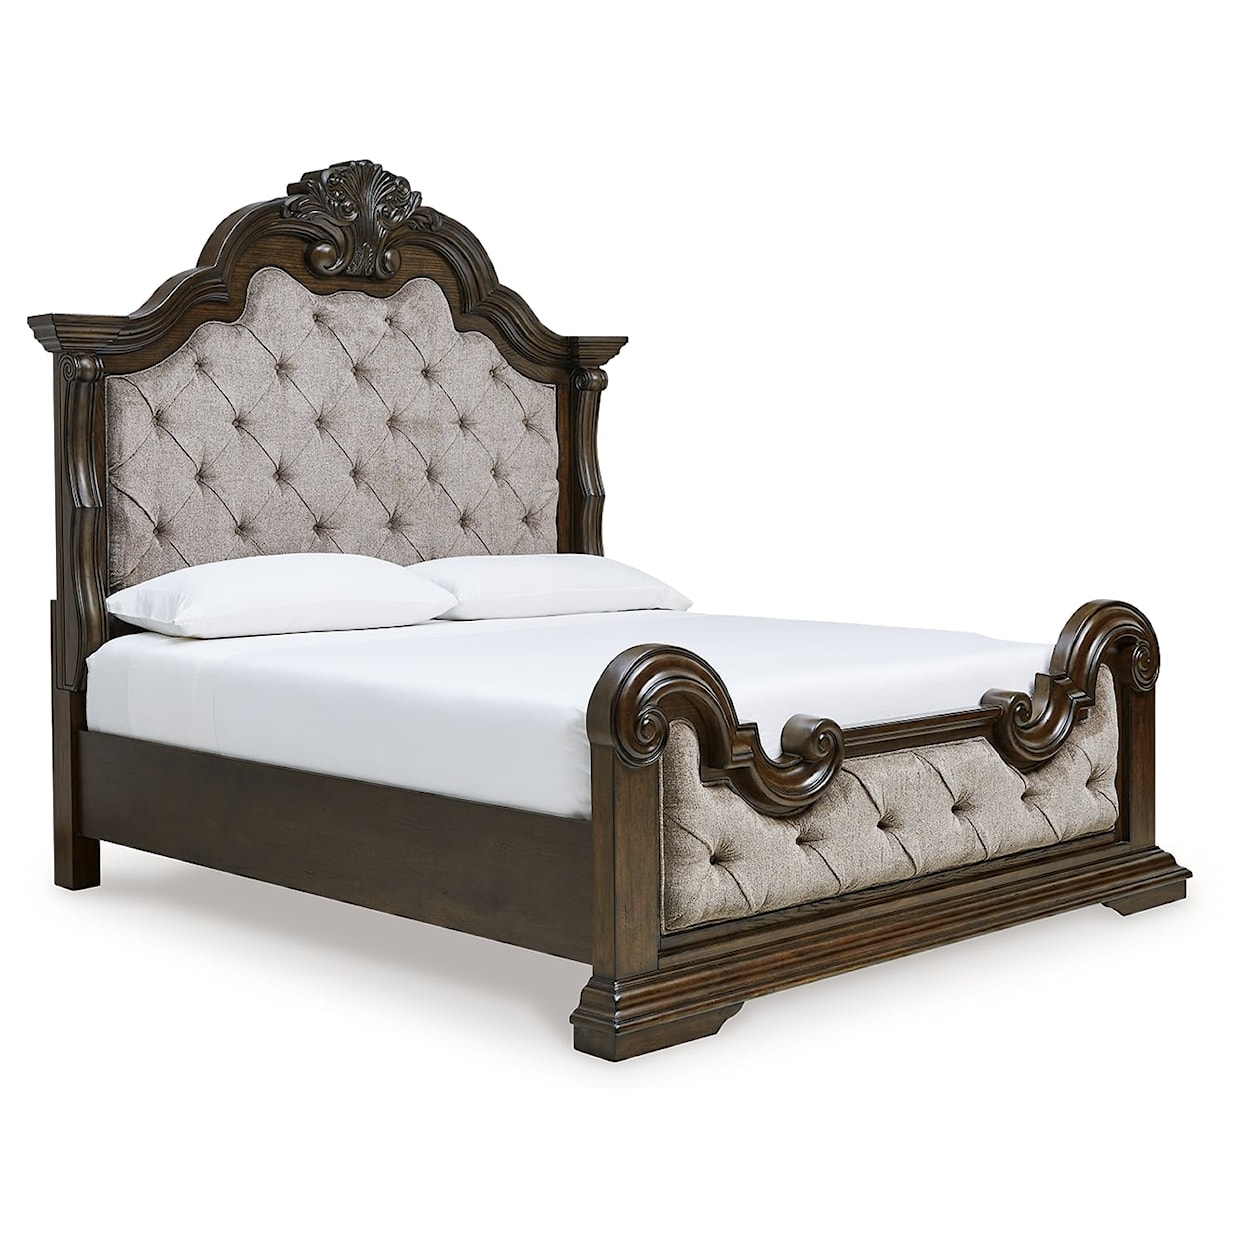 Signature Design Maylee California King Upholstered Bed